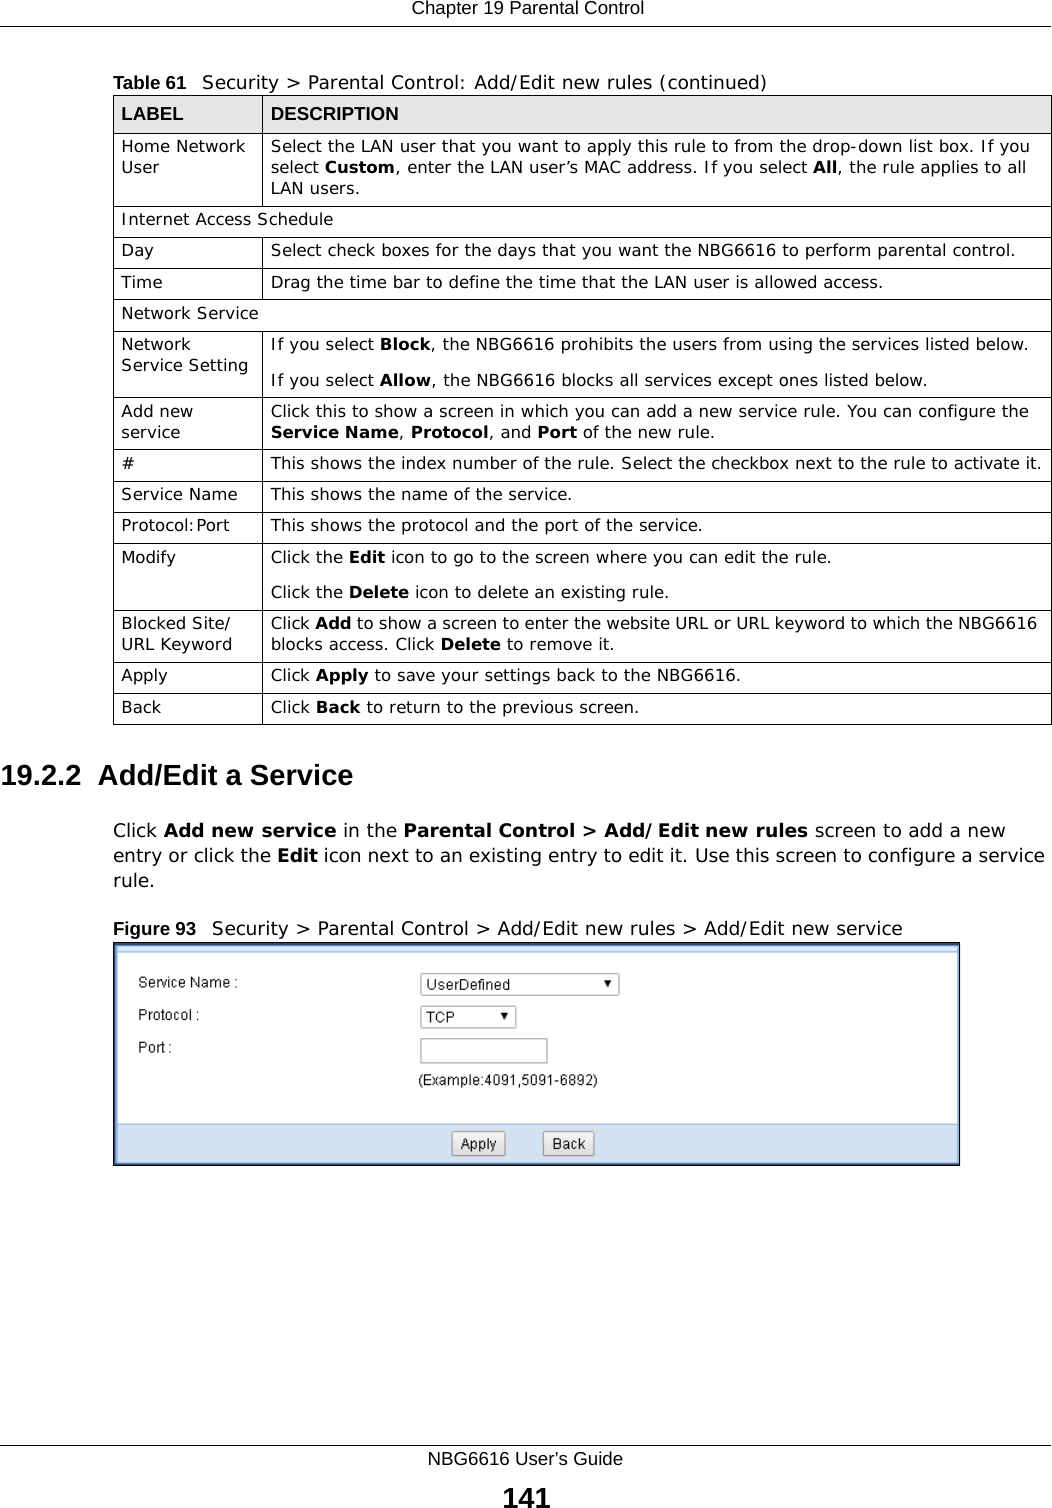  Chapter 19 Parental ControlNBG6616 User’s Guide14119.2.2  Add/Edit a ServiceClick Add new service in the Parental Control &gt; Add/Edit new rules screen to add a new entry or click the Edit icon next to an existing entry to edit it. Use this screen to configure a service rule.Figure 93   Security &gt; Parental Control &gt; Add/Edit new rules &gt; Add/Edit new service Home Network User Select the LAN user that you want to apply this rule to from the drop-down list box. If you select Custom, enter the LAN user’s MAC address. If you select All, the rule applies to all LAN users.Internet Access ScheduleDay Select check boxes for the days that you want the NBG6616 to perform parental control. Time Drag the time bar to define the time that the LAN user is allowed access. Network ServiceNetwork Service Setting  If you select Block, the NBG6616 prohibits the users from using the services listed below.If you select Allow, the NBG6616 blocks all services except ones listed below.Add new service Click this to show a screen in which you can add a new service rule. You can configure the Service Name, Protocol, and Port of the new rule.#This shows the index number of the rule. Select the checkbox next to the rule to activate it.Service Name This shows the name of the service.Protocol:Port This shows the protocol and the port of the service.Modify Click the Edit icon to go to the screen where you can edit the rule.Click the Delete icon to delete an existing rule.Blocked Site/URL Keyword Click Add to show a screen to enter the website URL or URL keyword to which the NBG6616 blocks access. Click Delete to remove it.Apply Click Apply to save your settings back to the NBG6616.Back Click Back to return to the previous screen.Table 61   Security &gt; Parental Control: Add/Edit new rules (continued)LABEL DESCRIPTION